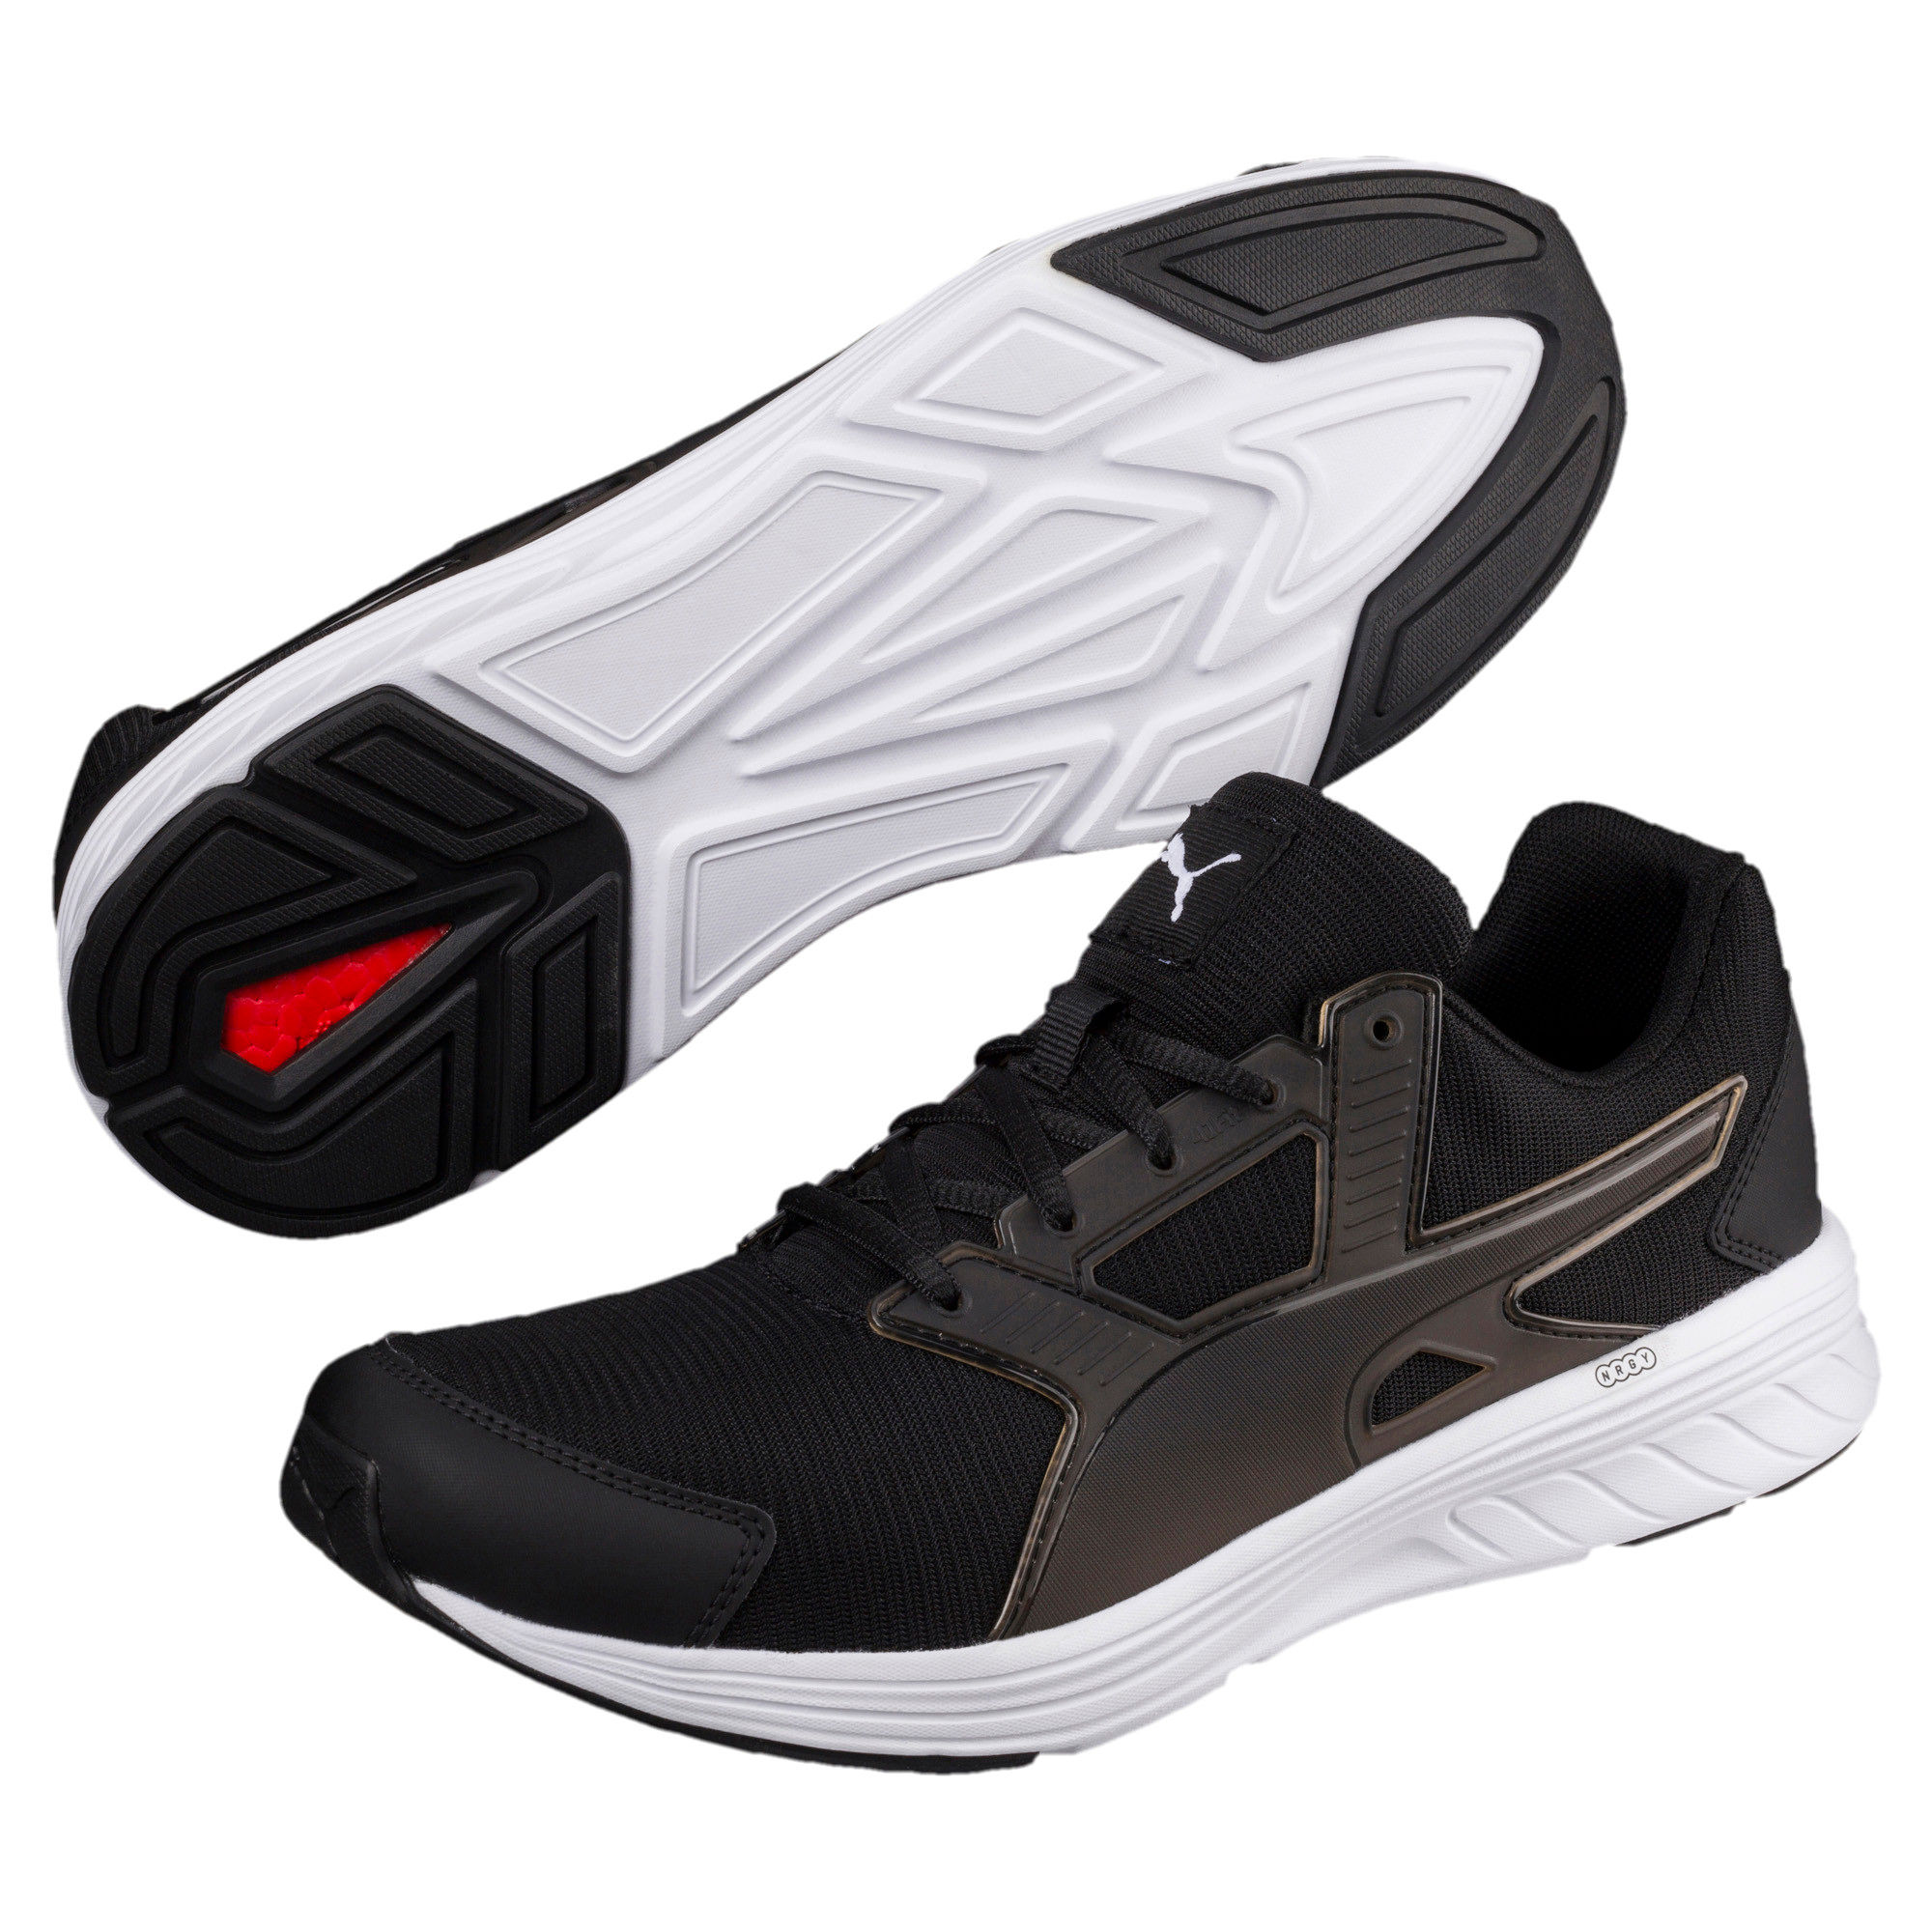 Puma Nrgy Driver Nm Black- White Running Shoe: Buy Puma Nrgy Driver Nm  Black- White Running Shoe Online at Best Price in India | Nykaa